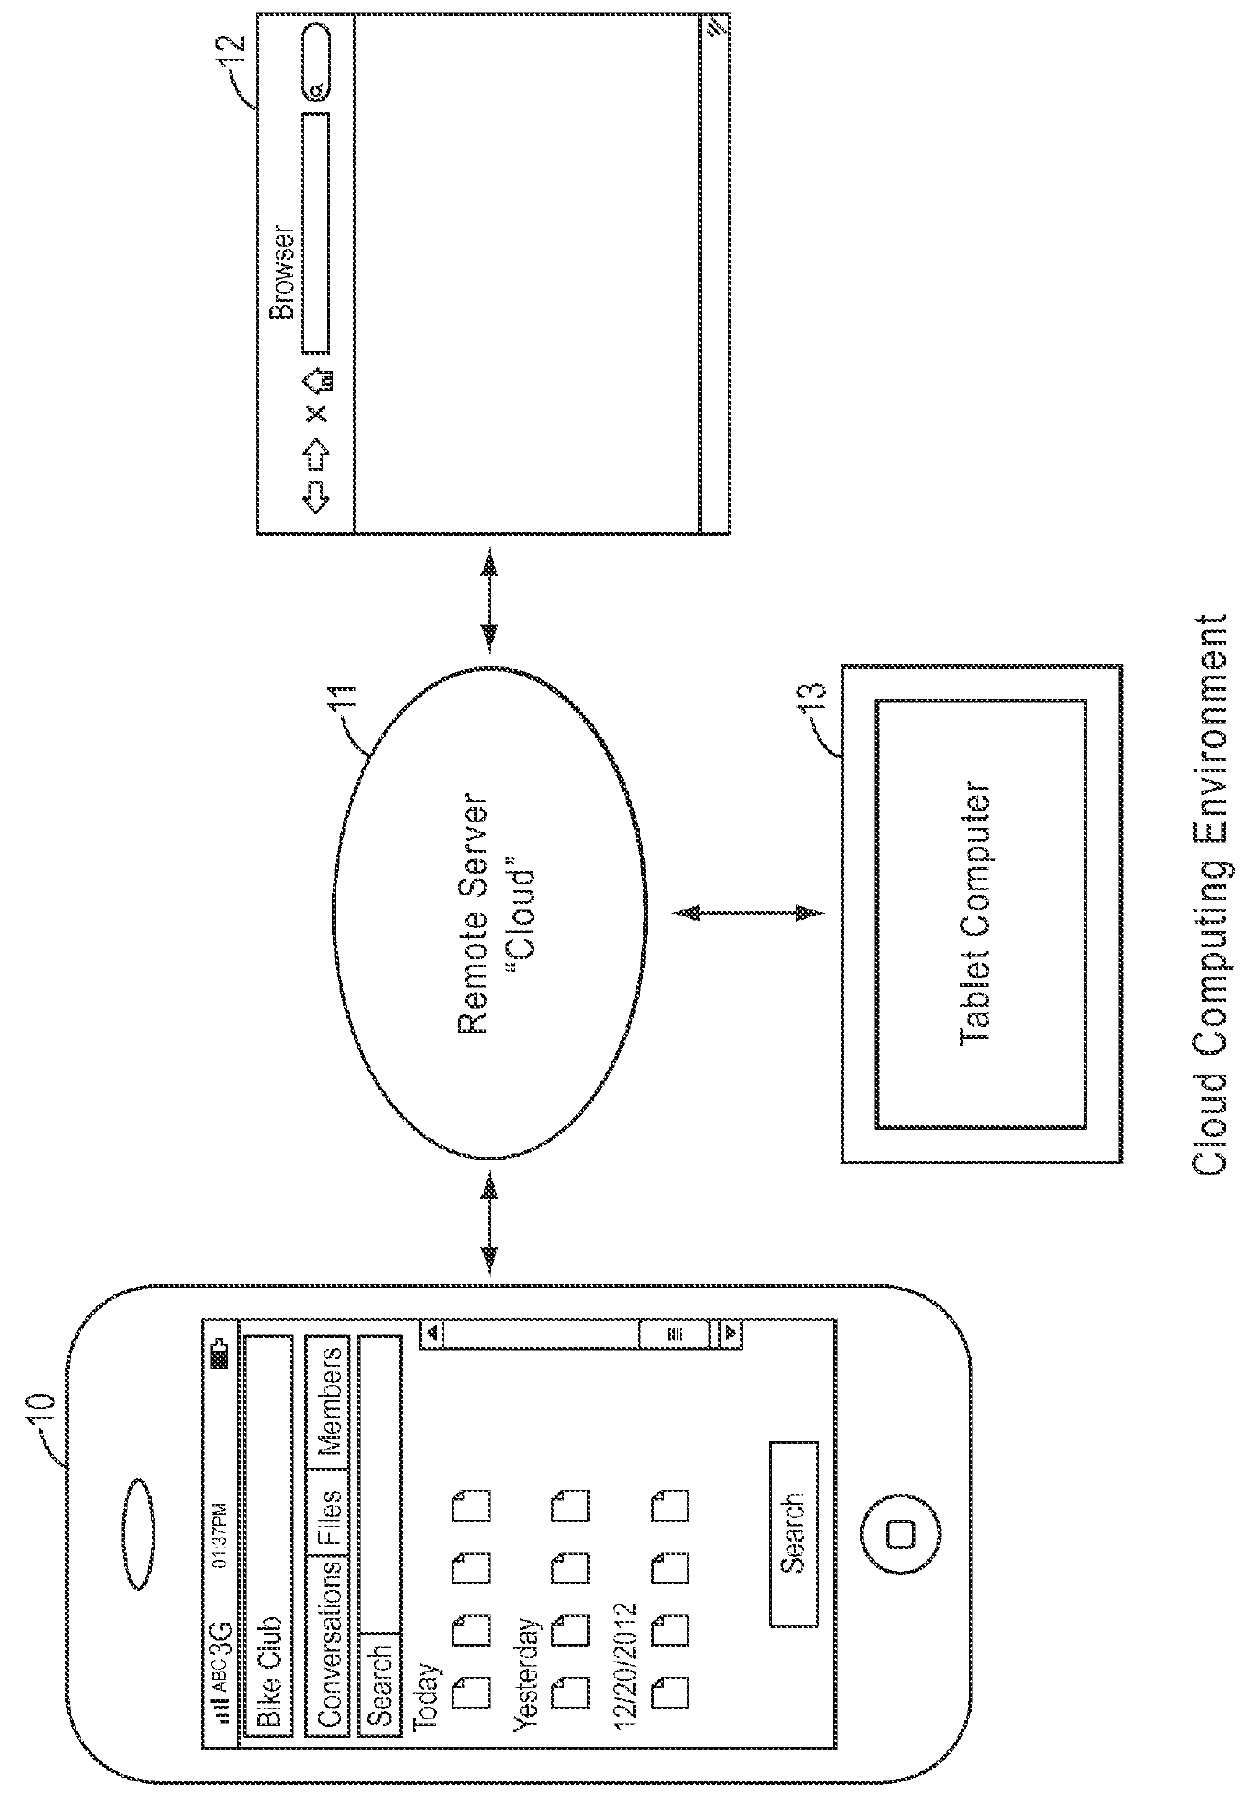 Online systems and methods for advancing information organization sharing and collective action